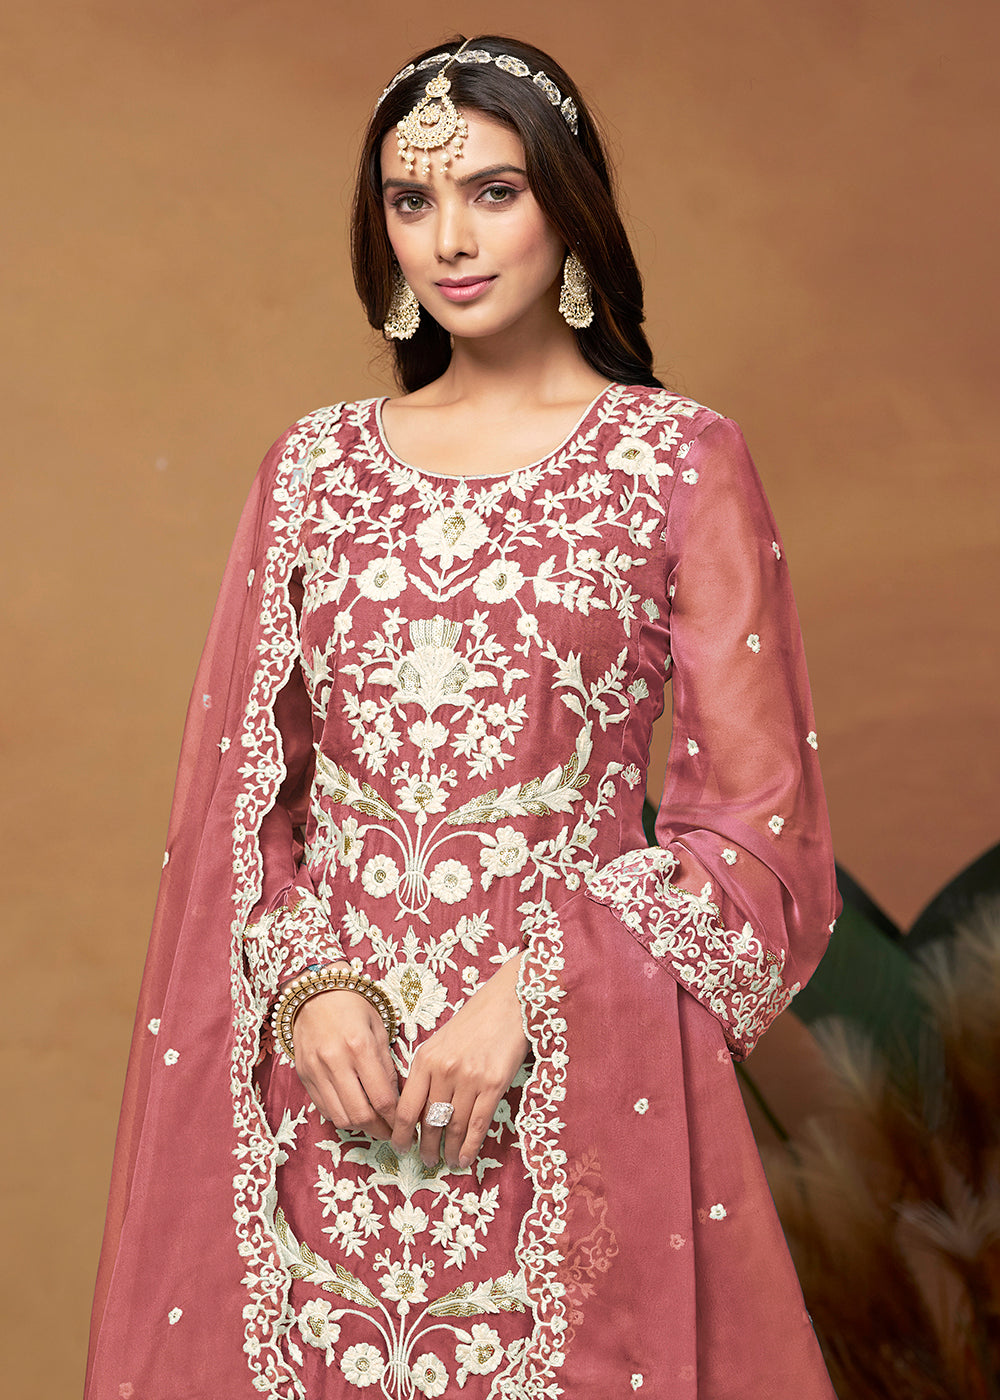 Buy Now Amazing Pink Organza Embroidered Designer Salwar Suit Online in USA, UK, Canada, Germany, Australia & Worldwide at Empress Clothing. 